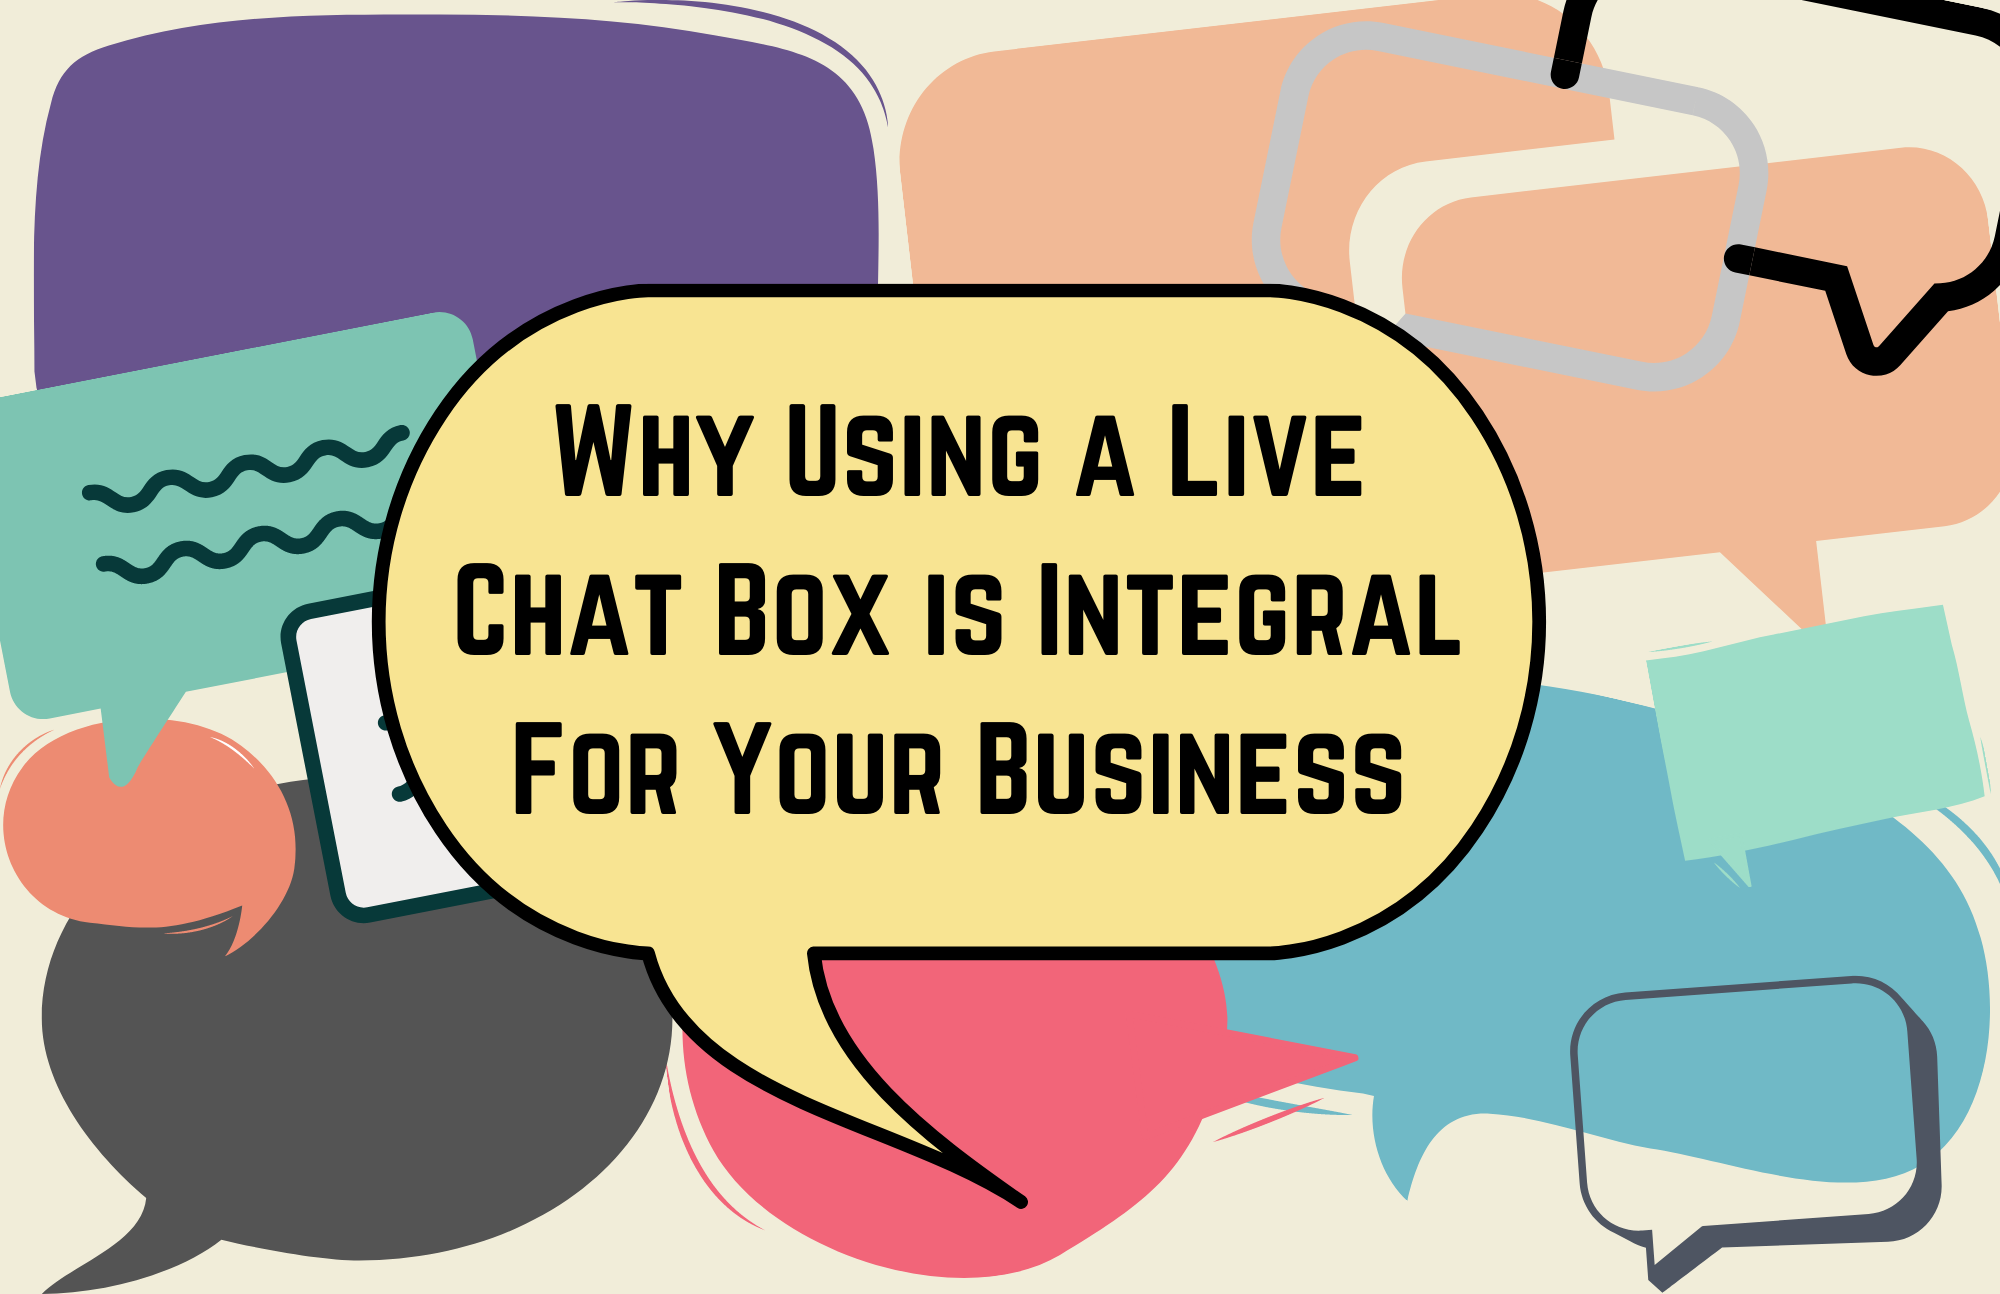 Why Using a Live Chat Box is Integral For Your Business